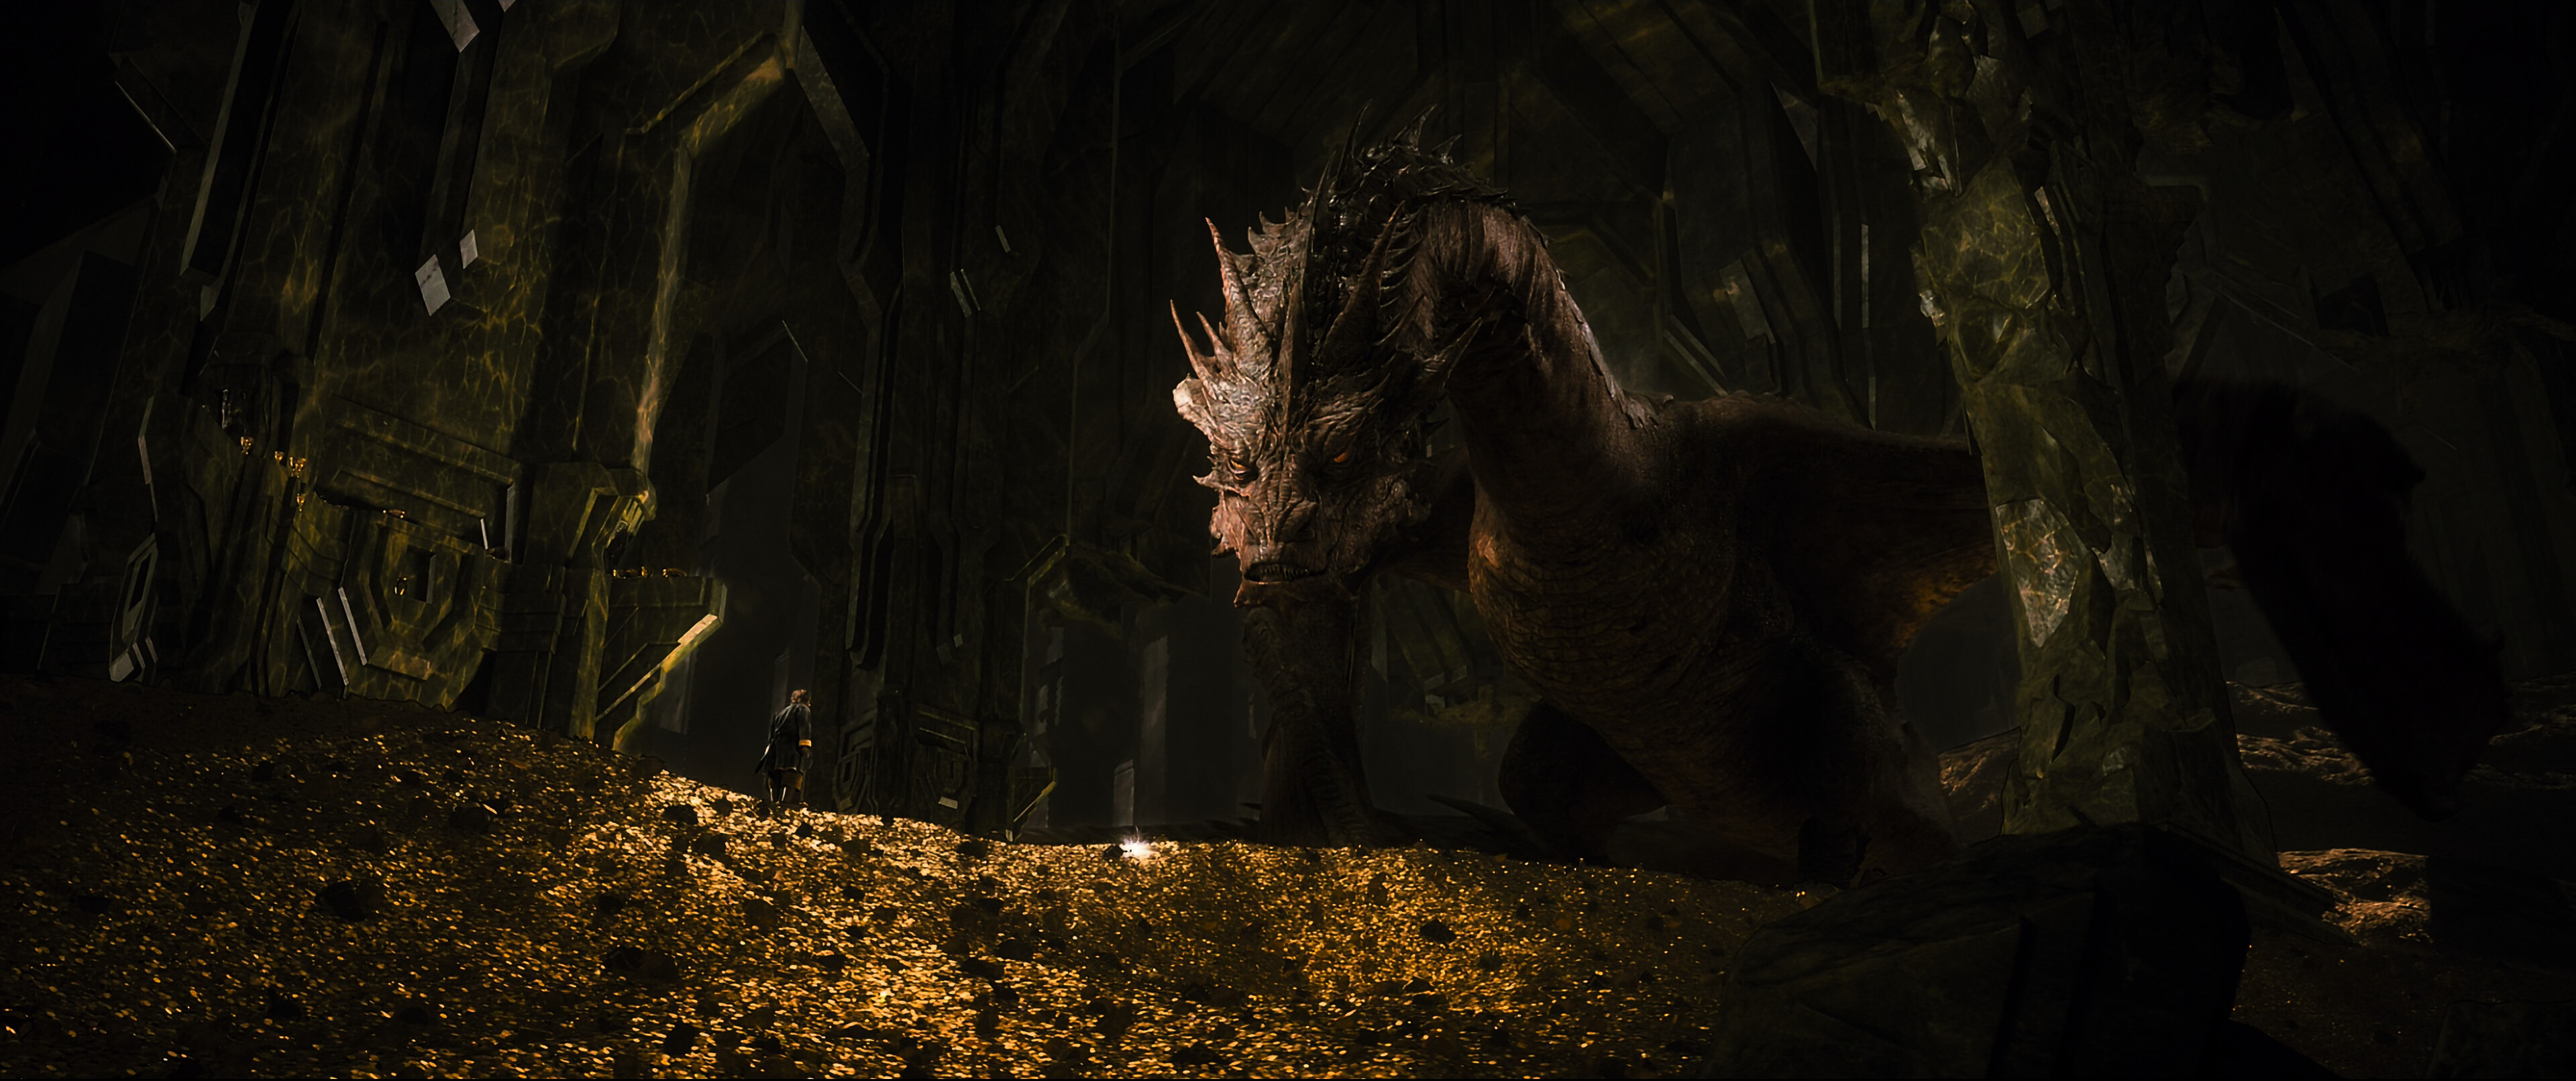 instaling The Hobbit: The Desolation of Smaug